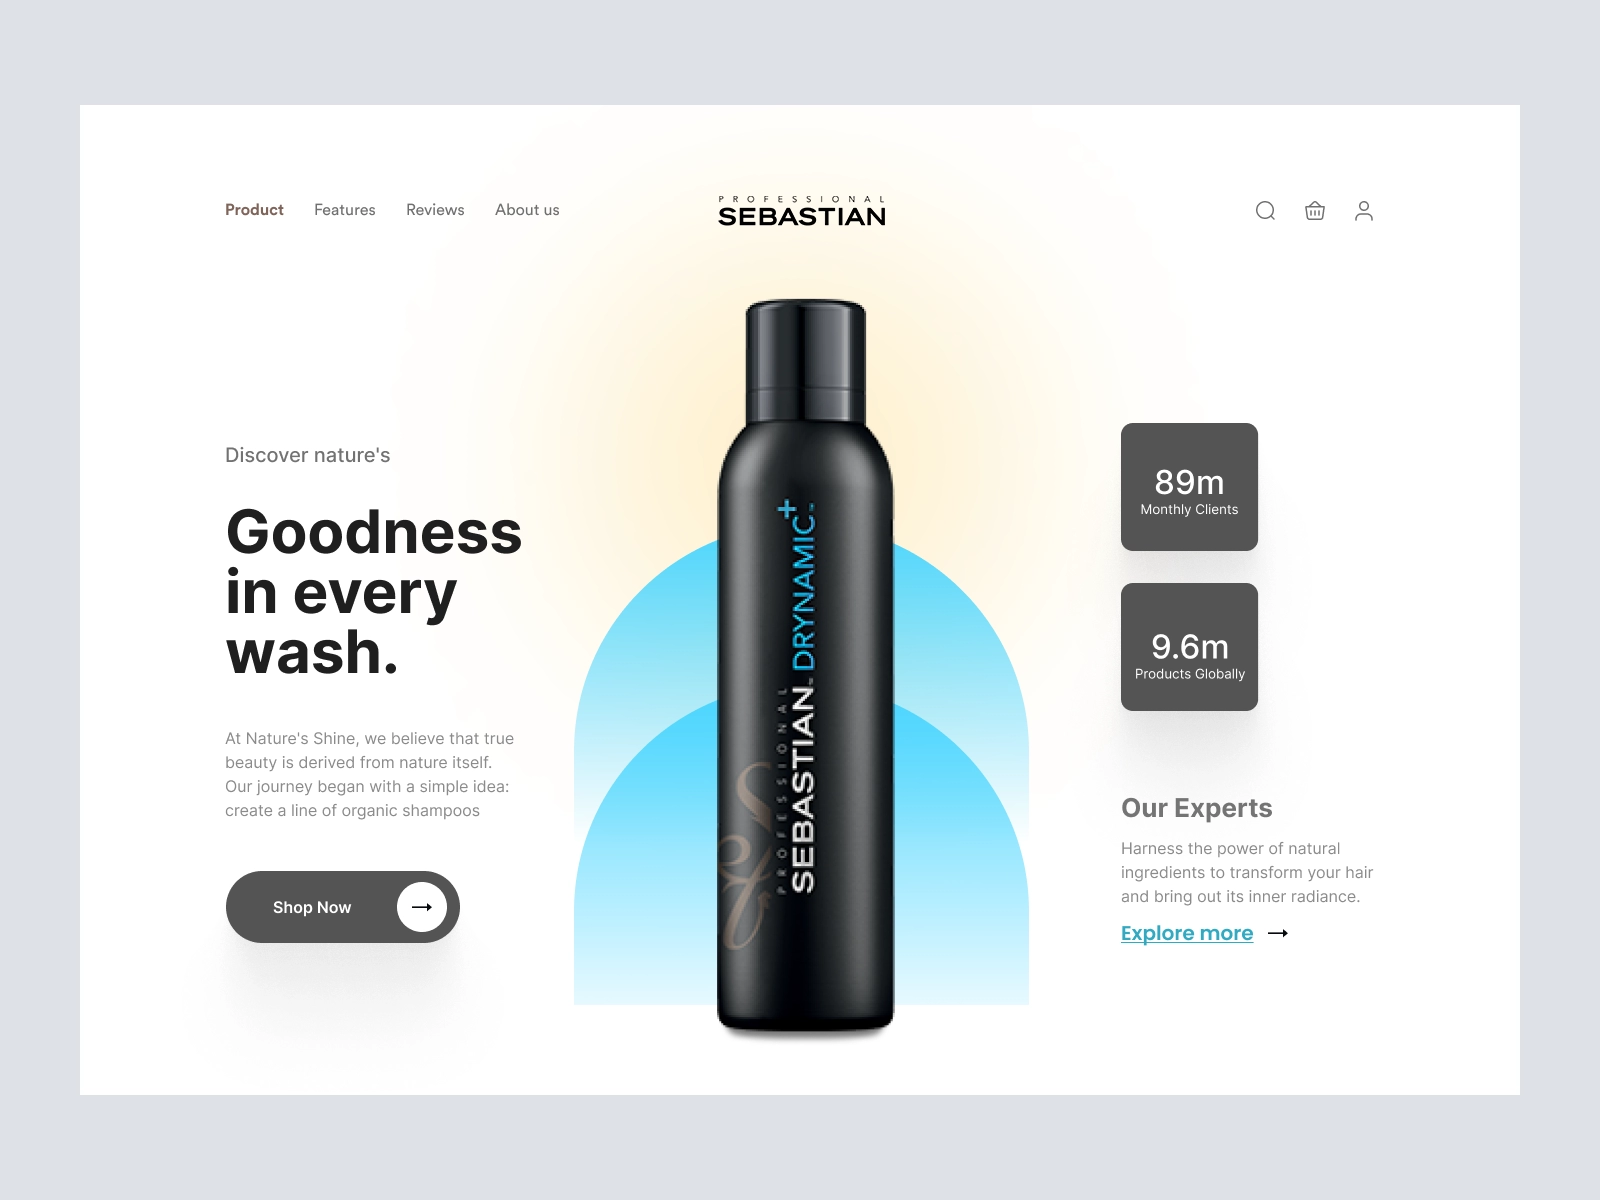 Sebastian - Perfume and Body Clones Shopify Store Design for Figma and Adobe XD - screen 1